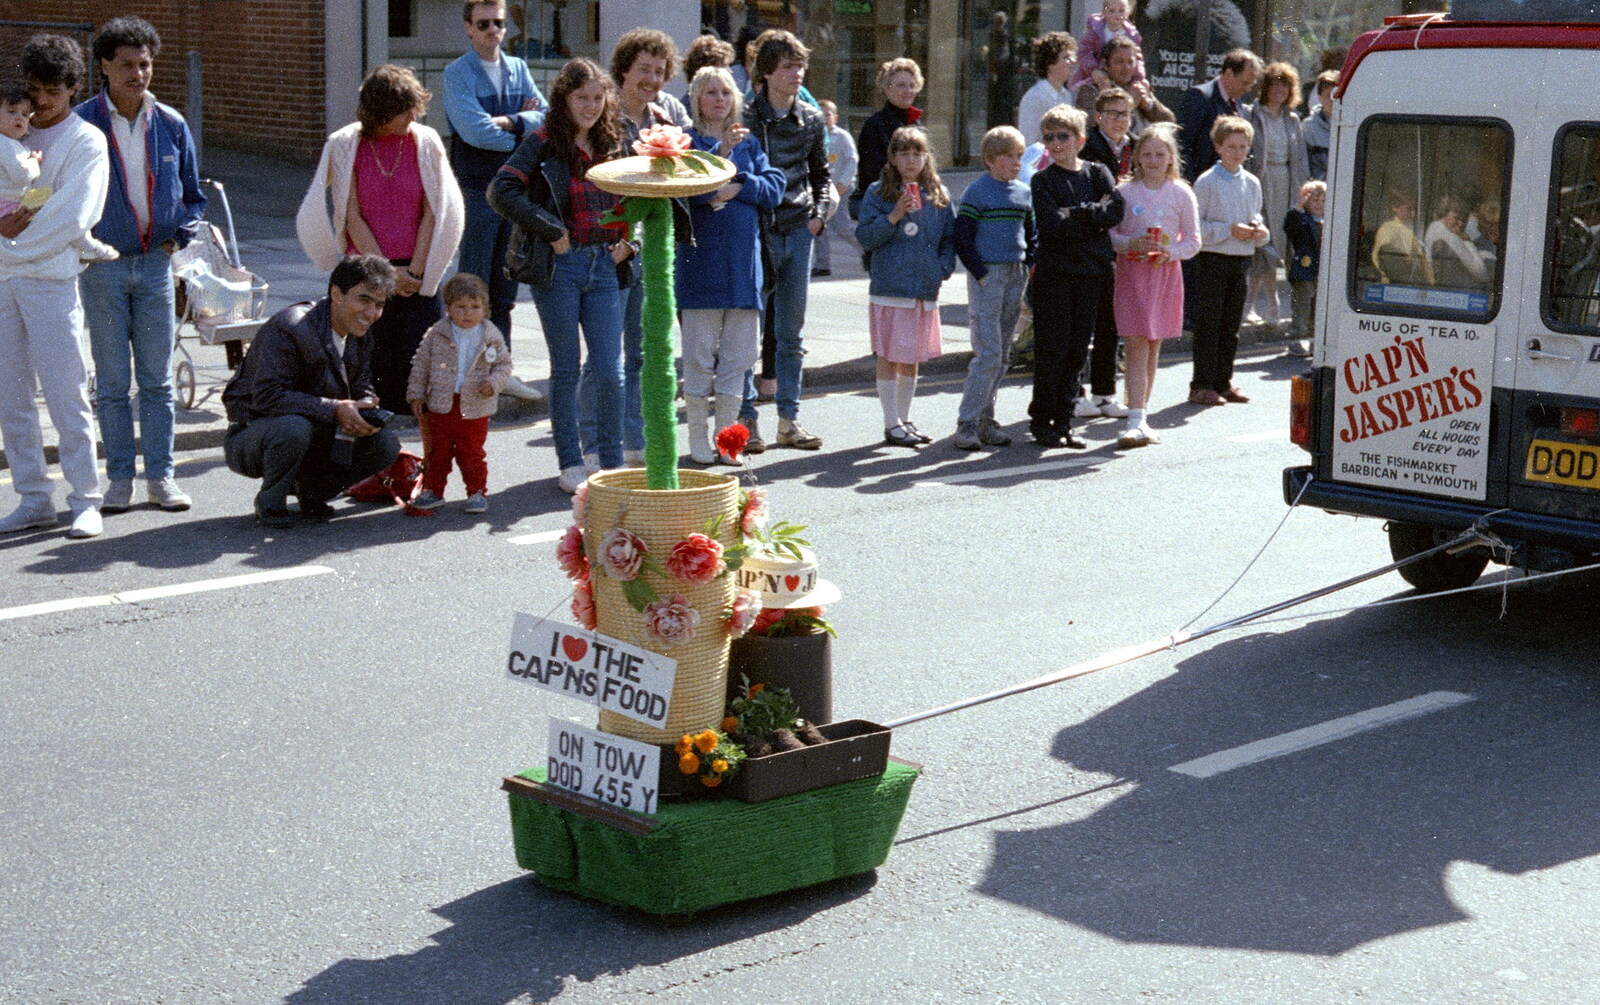 Cap'n Jasper tows a little trailer around from Uni: The Lord Mayor's Procession, Plymouth, Devon - 21st May 1986